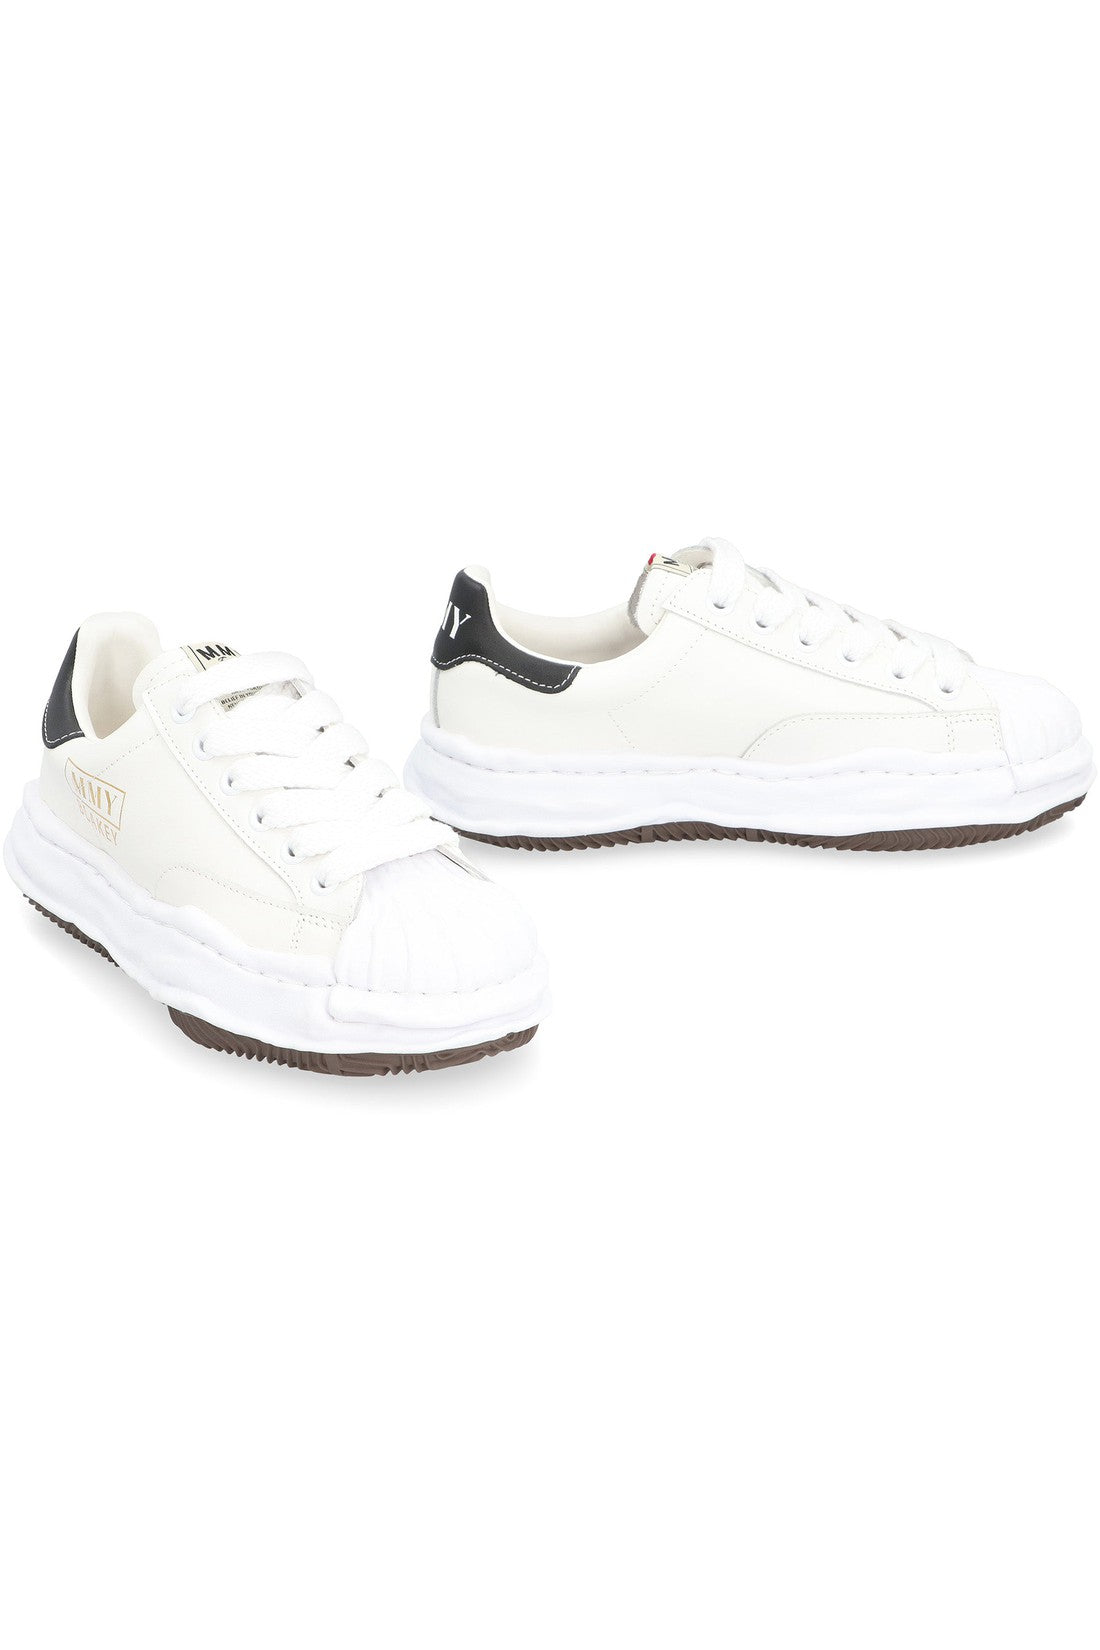 Maison Mihara Yasuhiro-OUTLET-SALE-Blakey leather low-top sneakers-ARCHIVIST